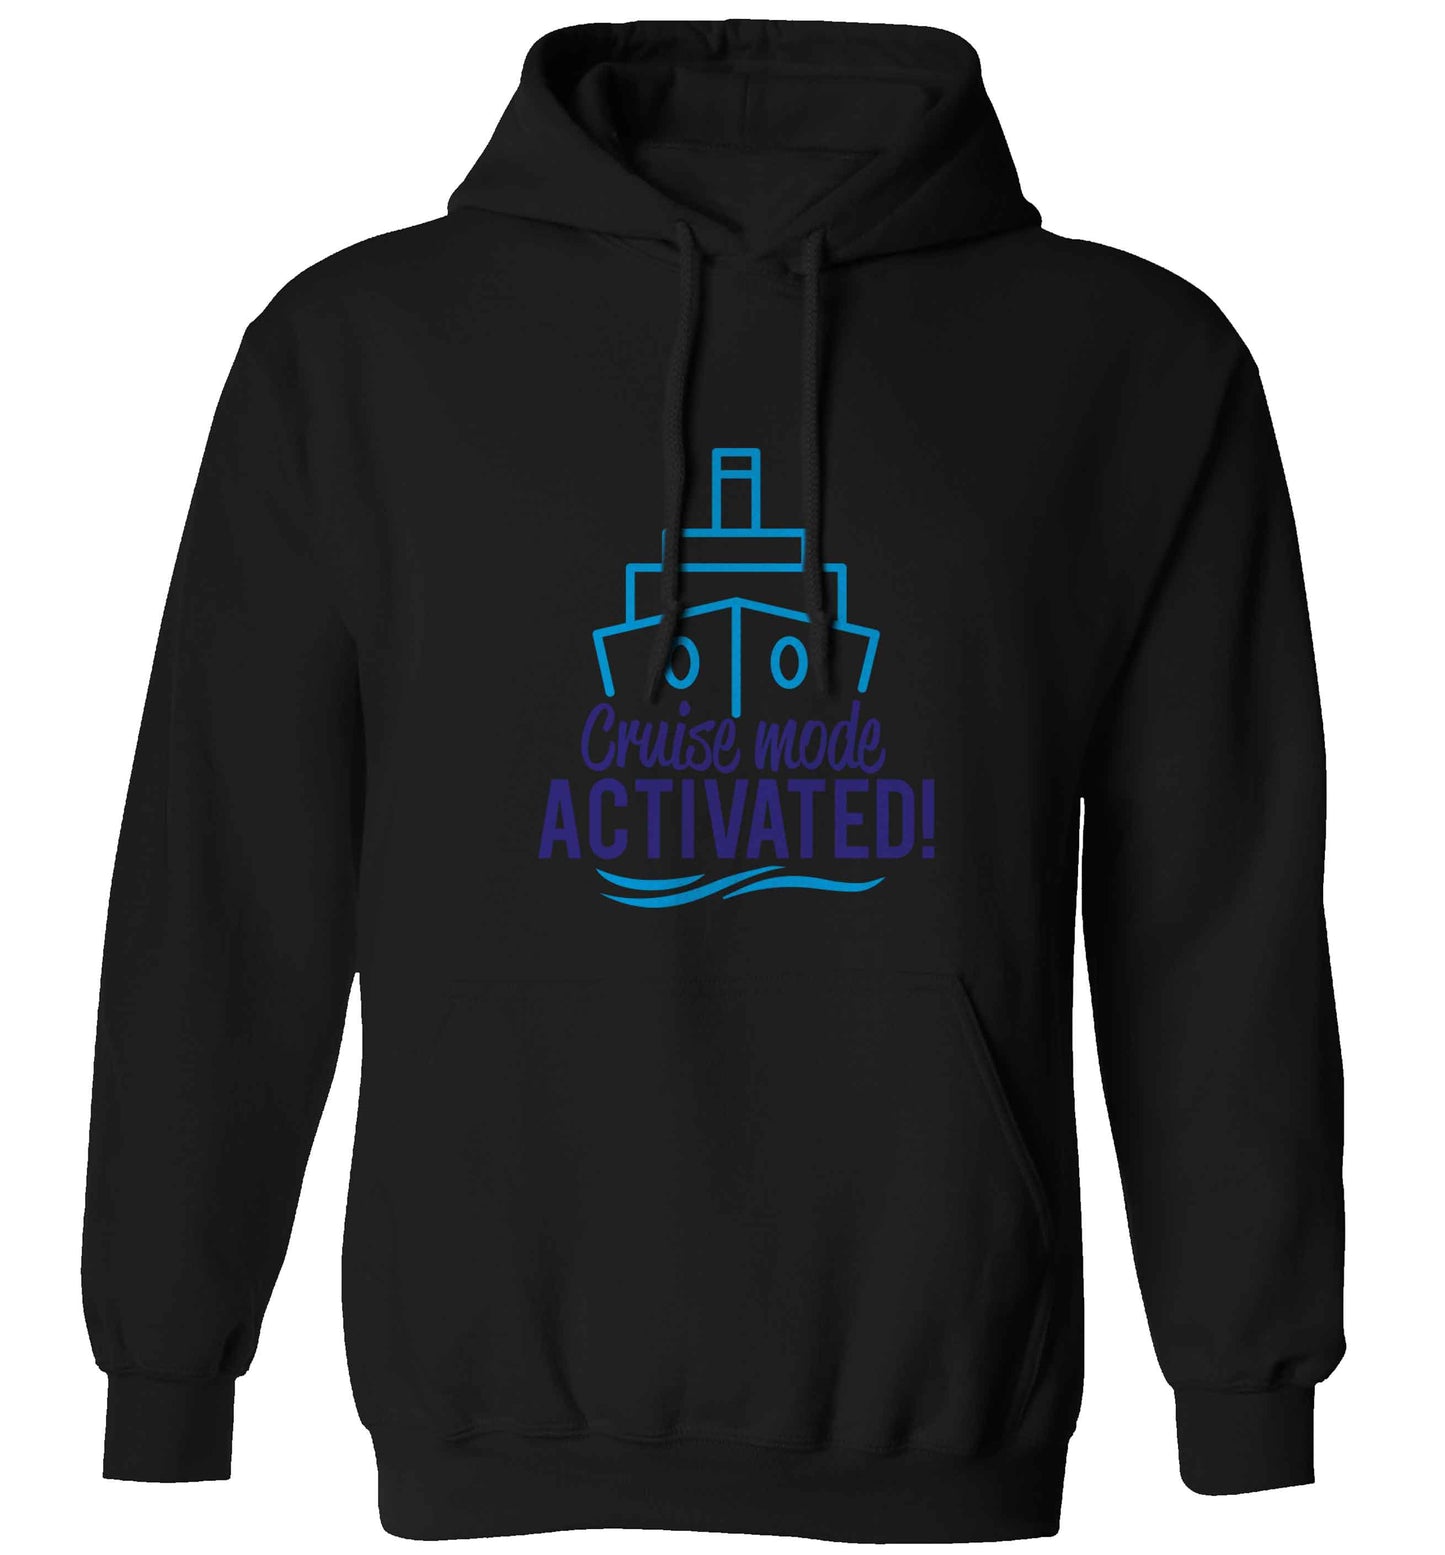 Cruise mode activated adults unisex black hoodie 2XL